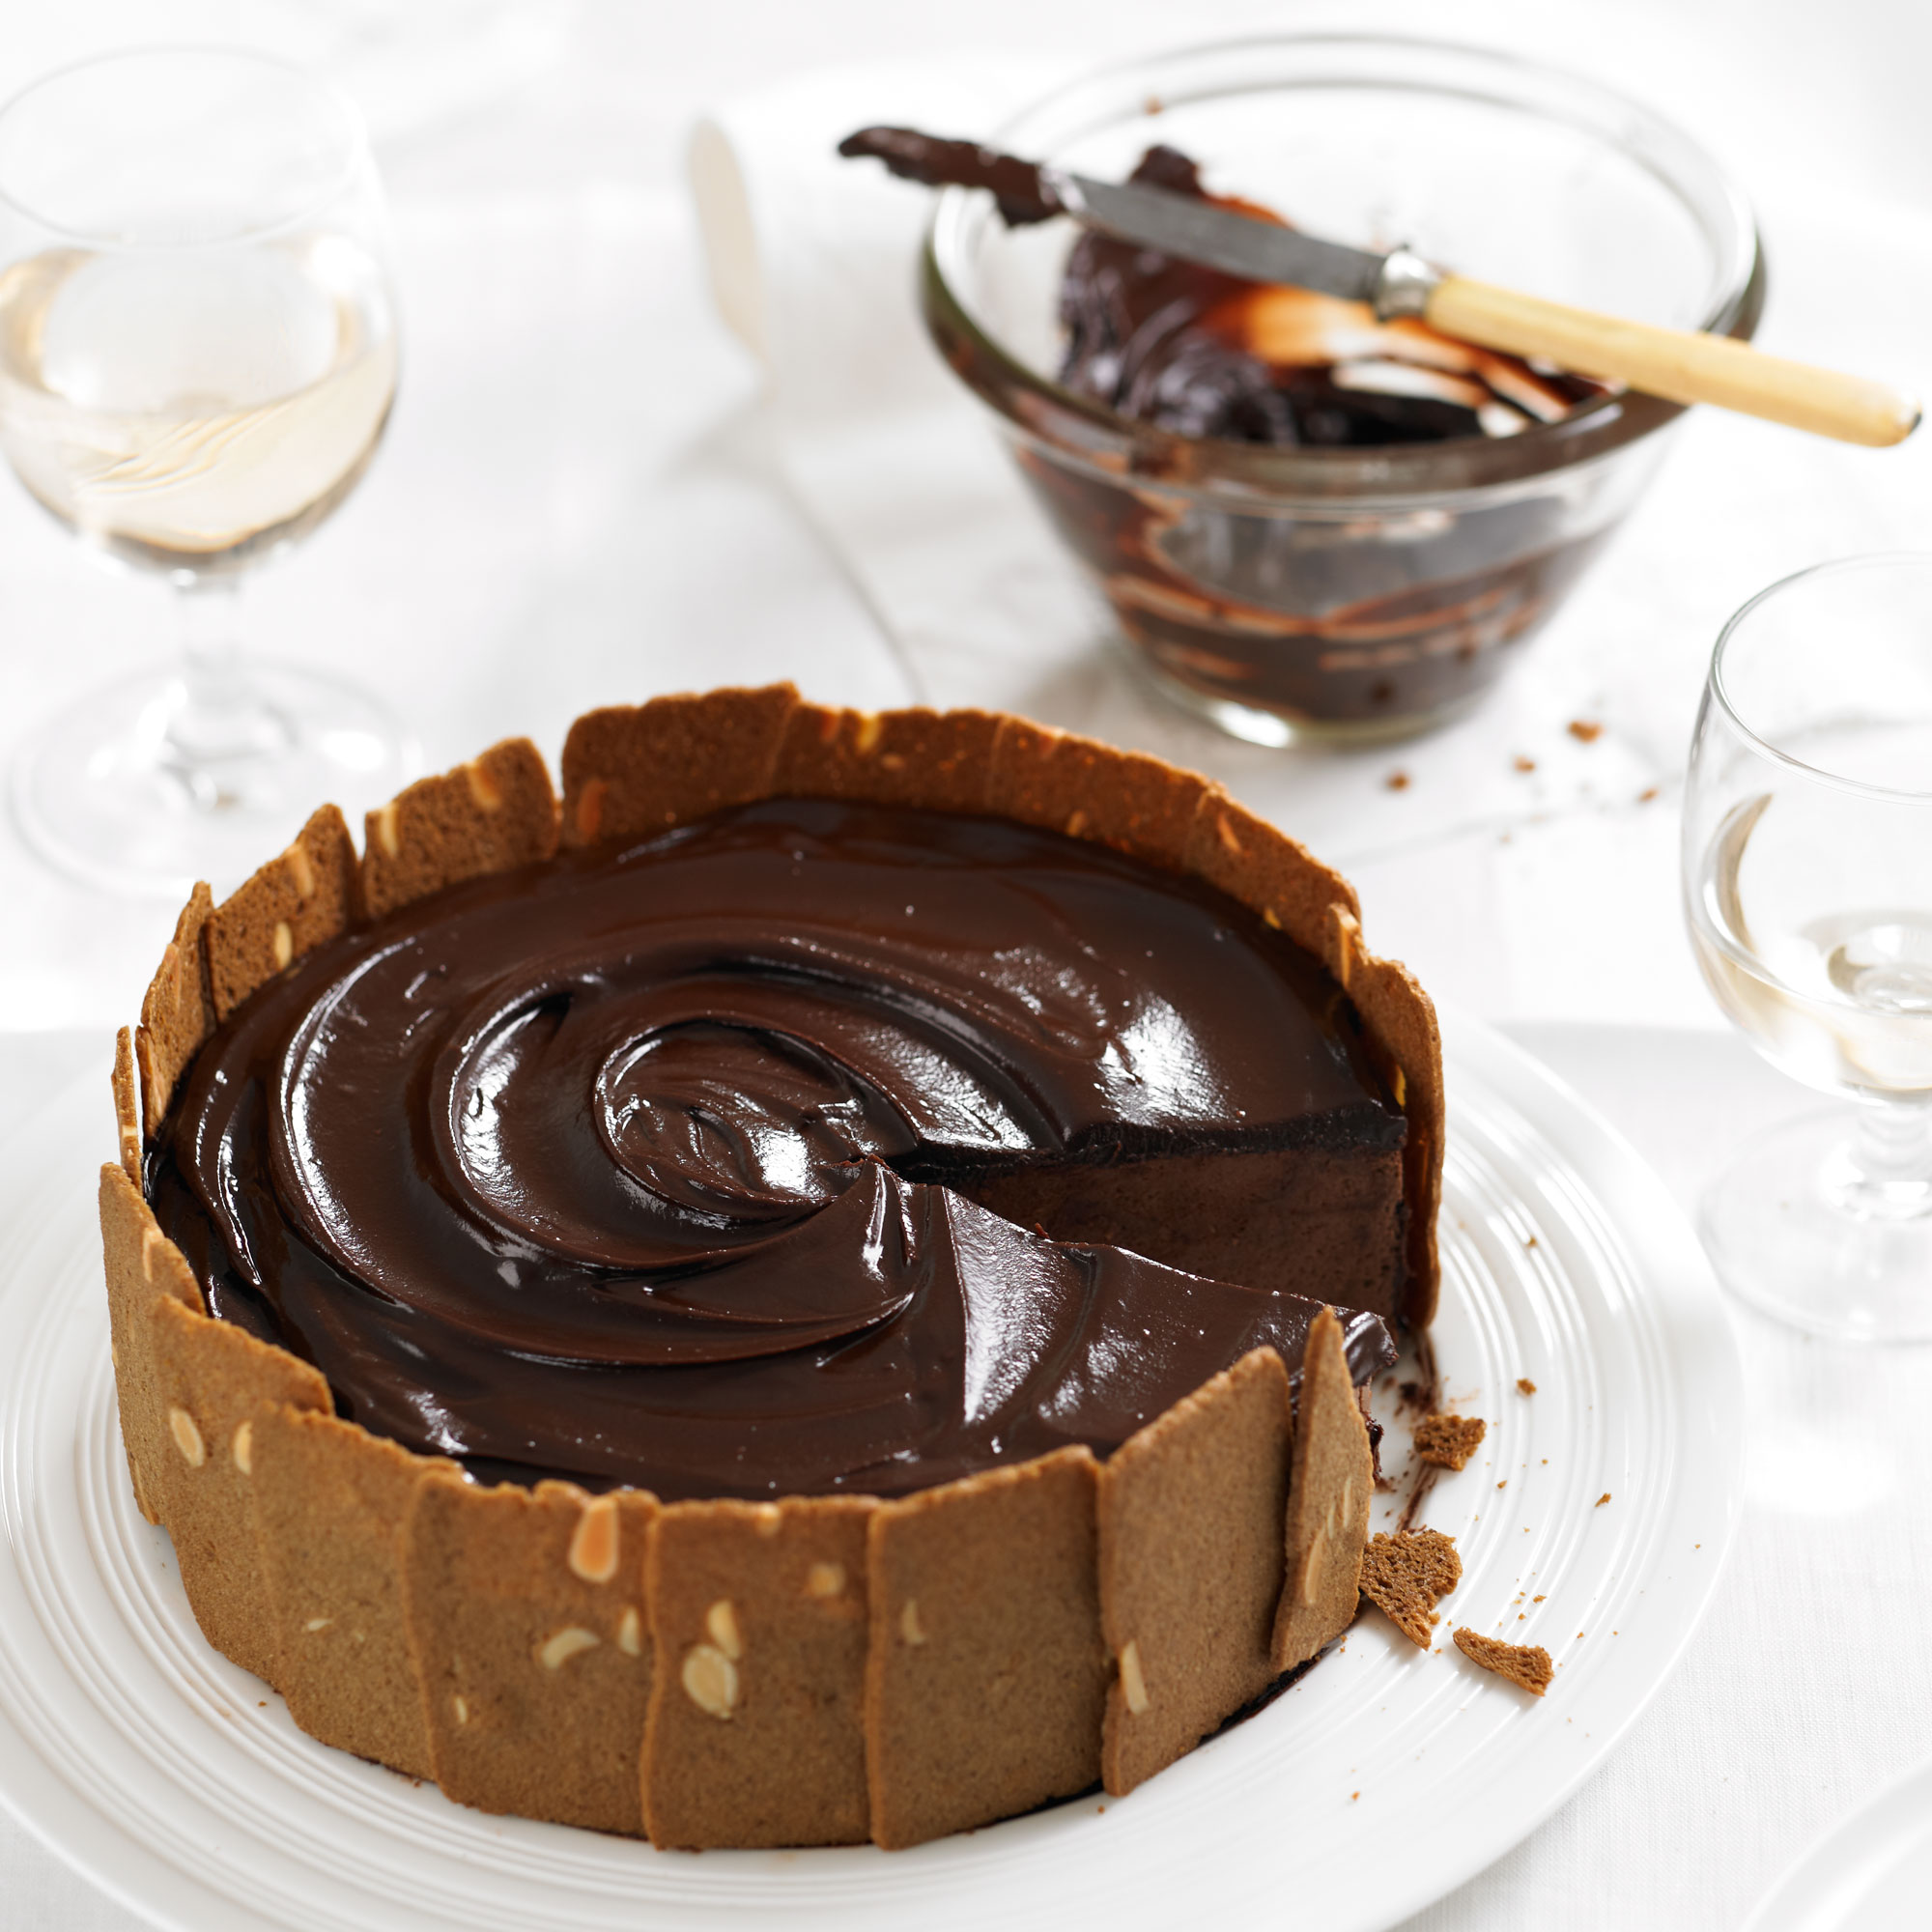 Chocolate Charlotte - Recipe with images - Meilleur du Chef